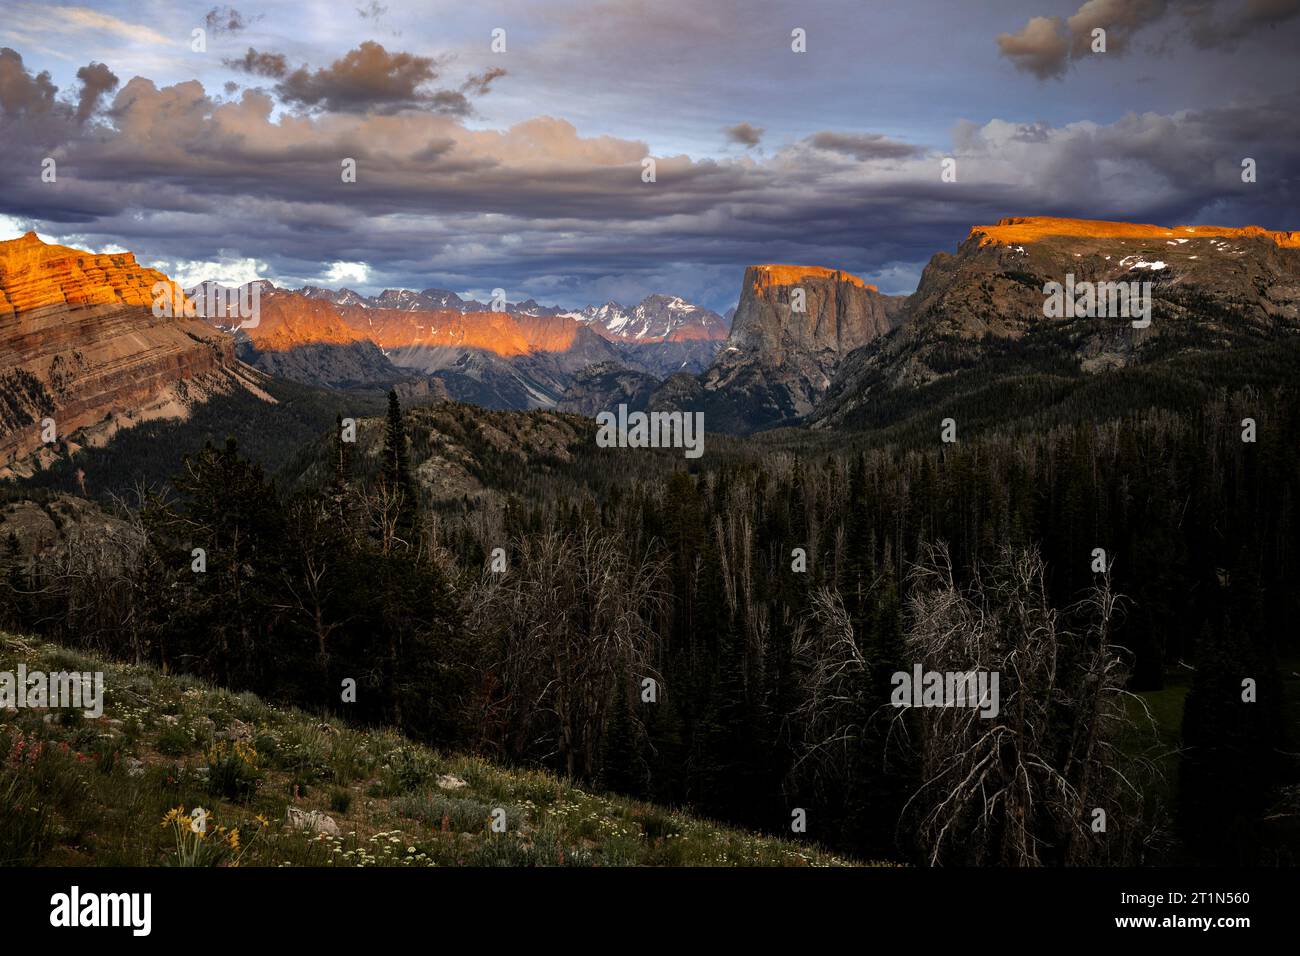 WY05414-00....WYOMING - Squaretop Mountain and the Wind River Range viewed from the Twin Lakes Trail, Bridger Wilderness, Bridger National Forest. Stock Photo